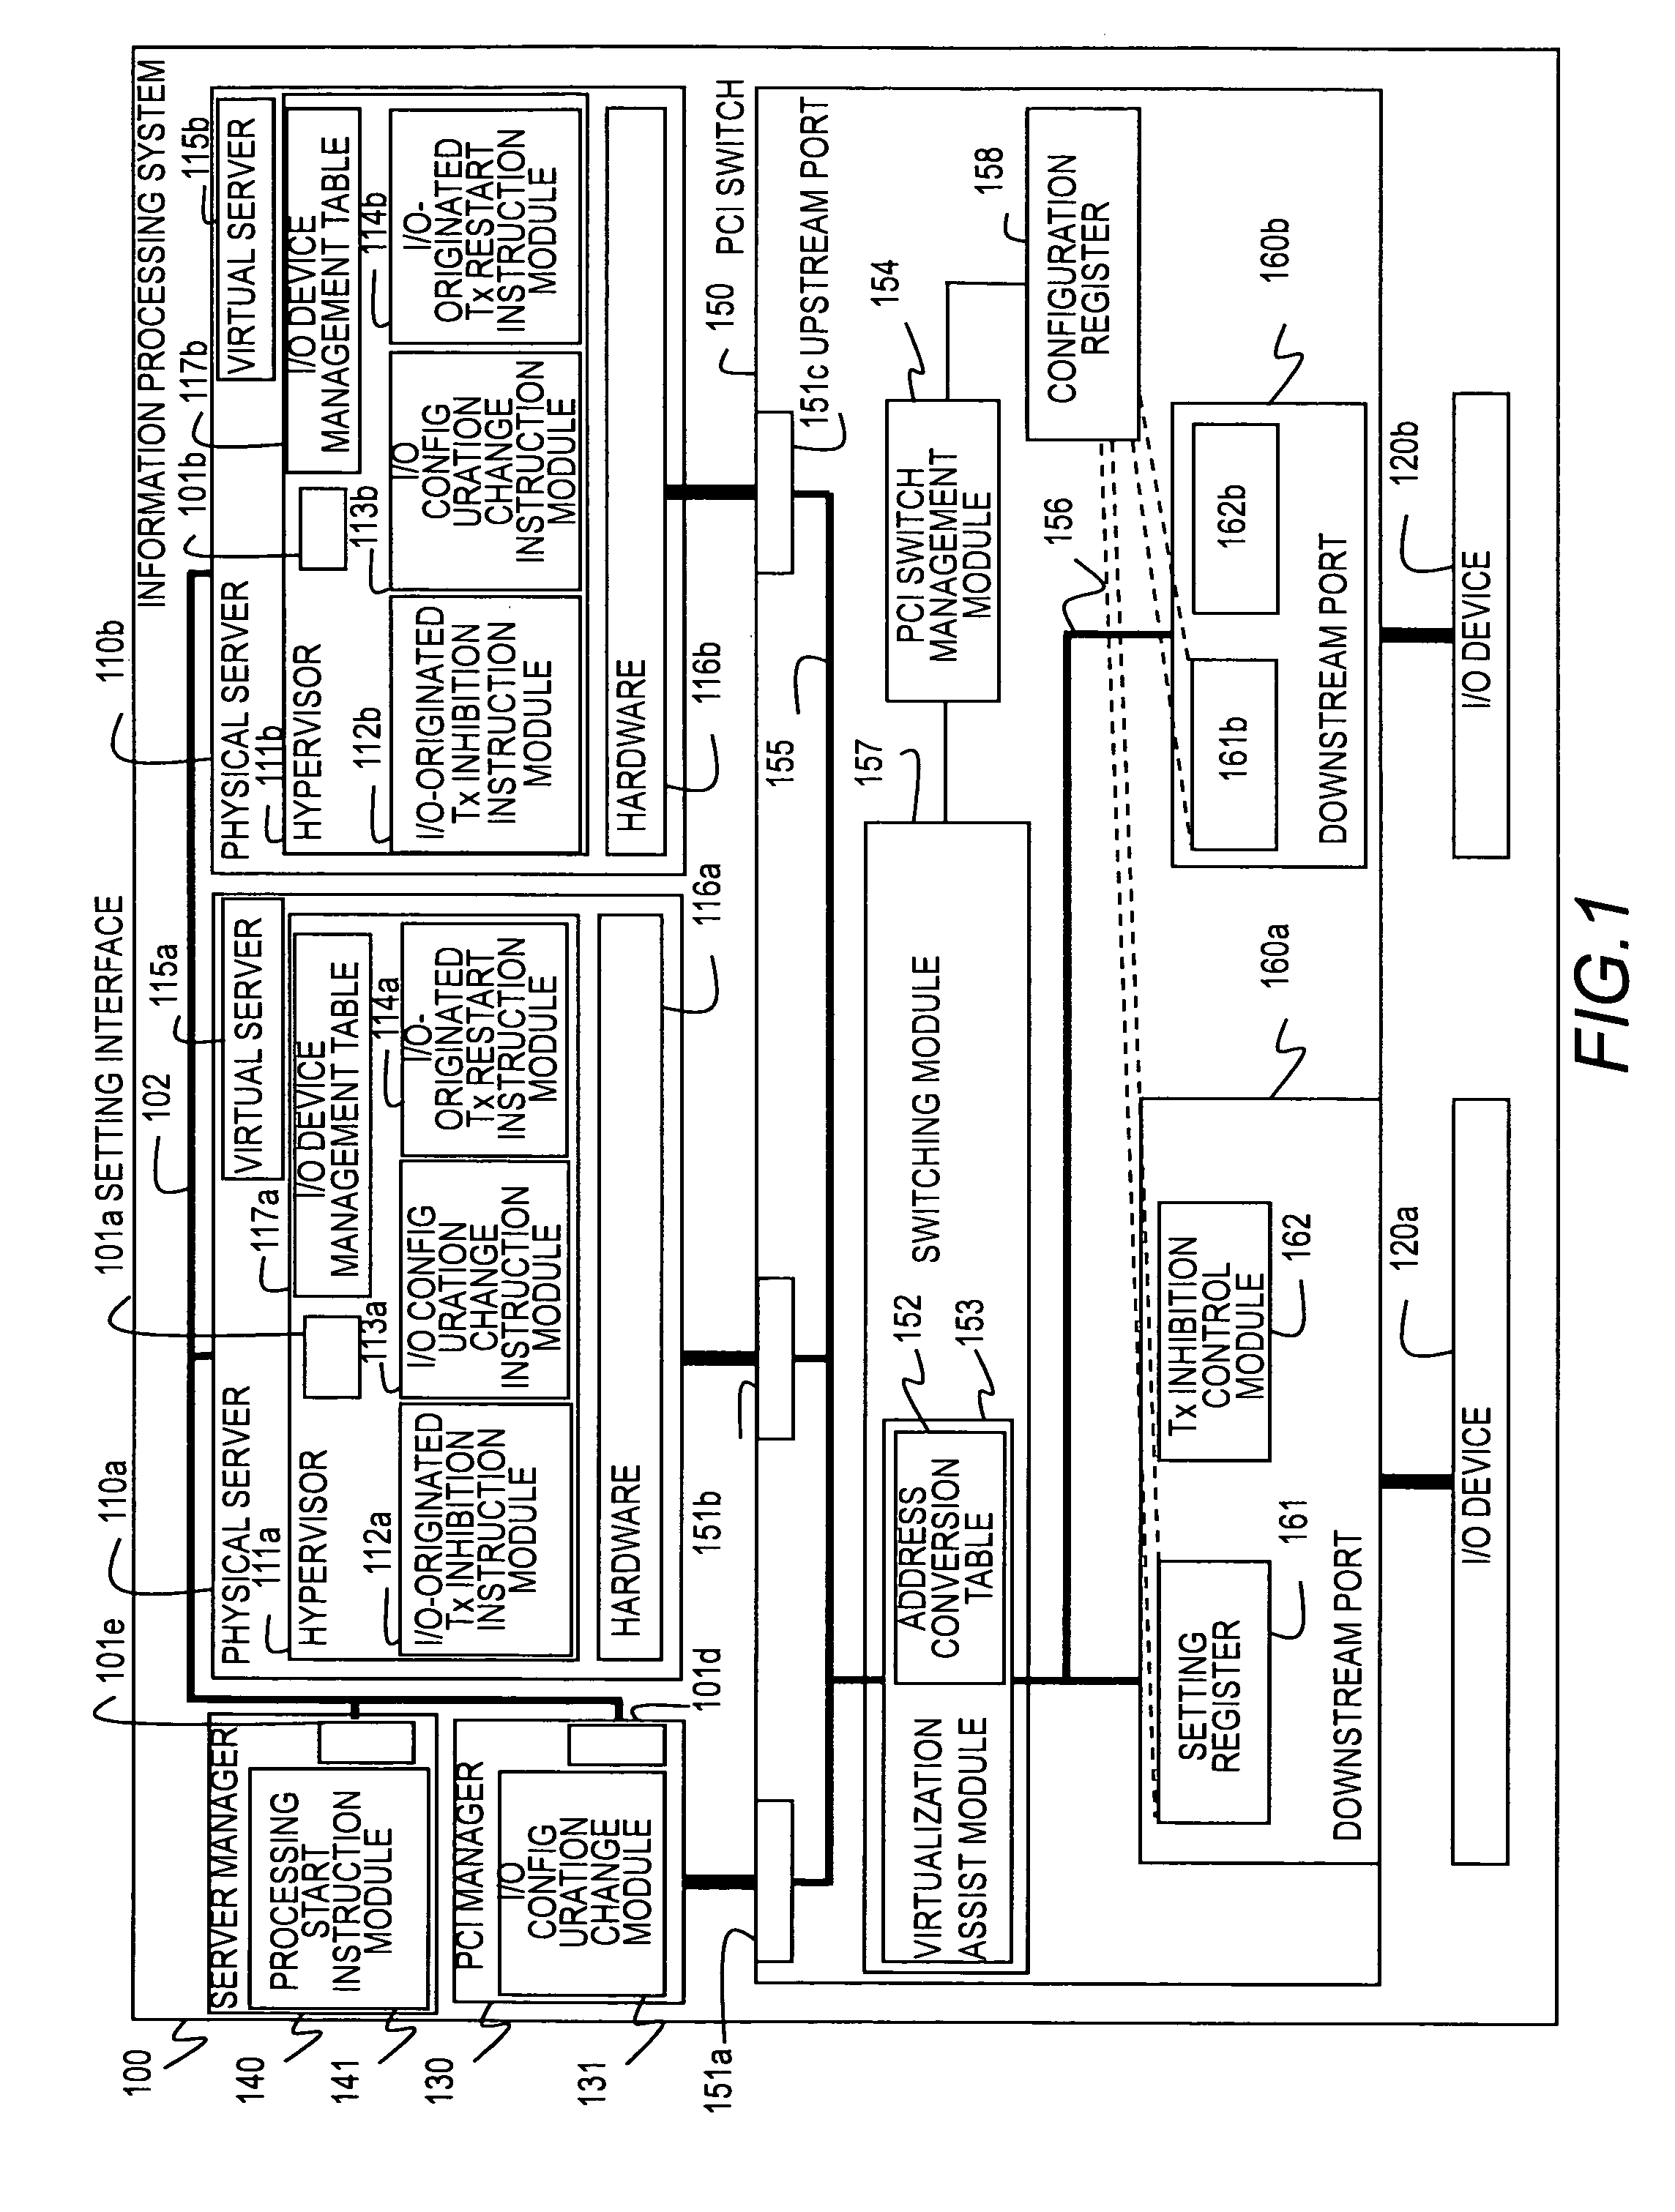 Method for switching I/O path in a computer system having an I/O switch